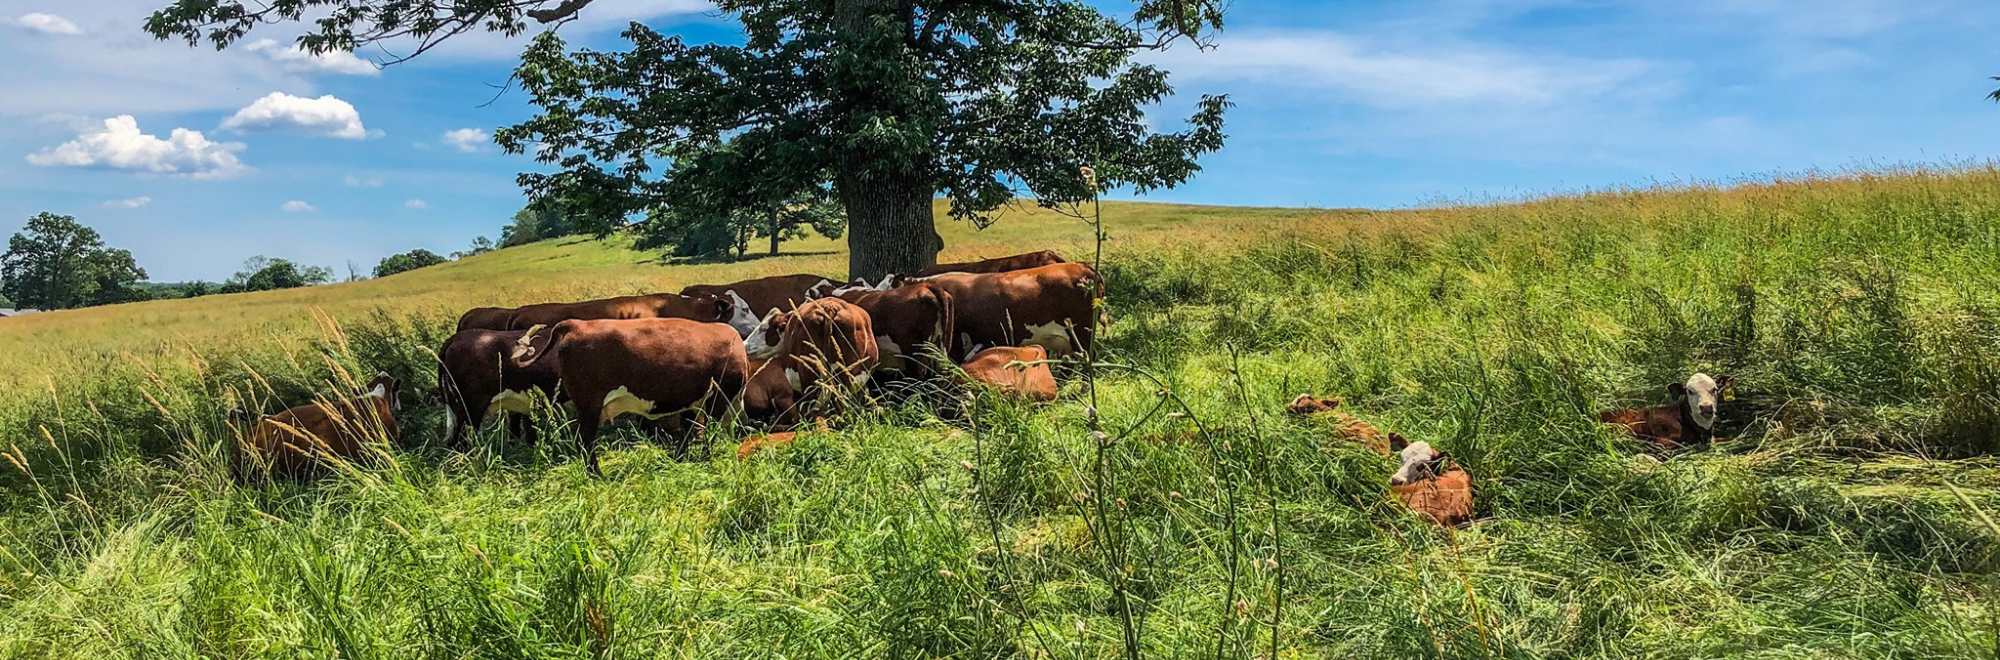 Group of cows laying in the grass on Horsebarn Hill